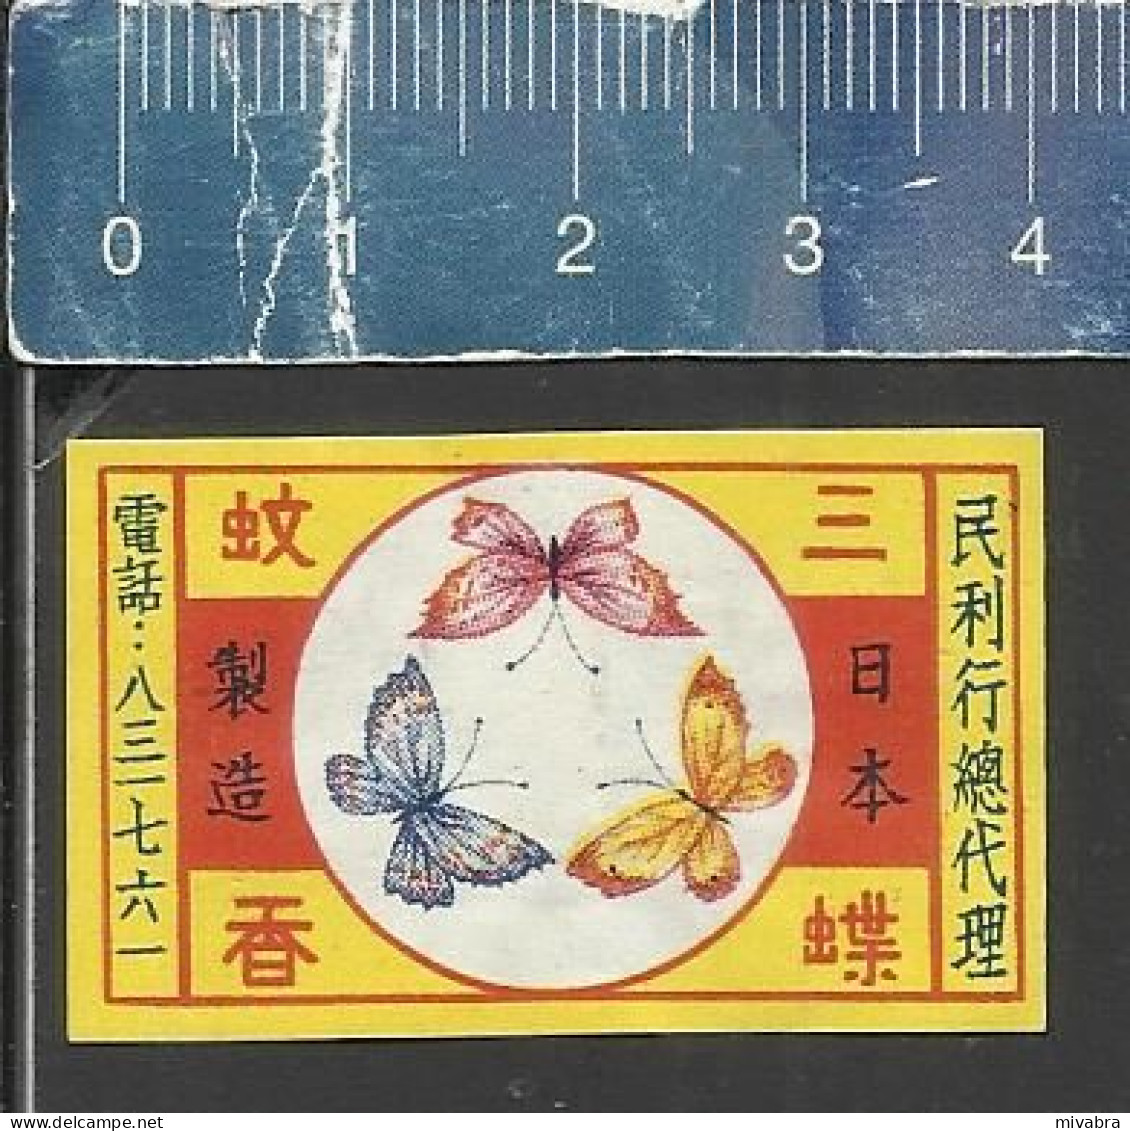 BUTTERFLIES ( BUTTERFLY VLINDERS PAPILLONS ) OLD VINTAGE SMALL MATCHBOX LABEL MADE IN CHINA - Zündholzschachteletiketten